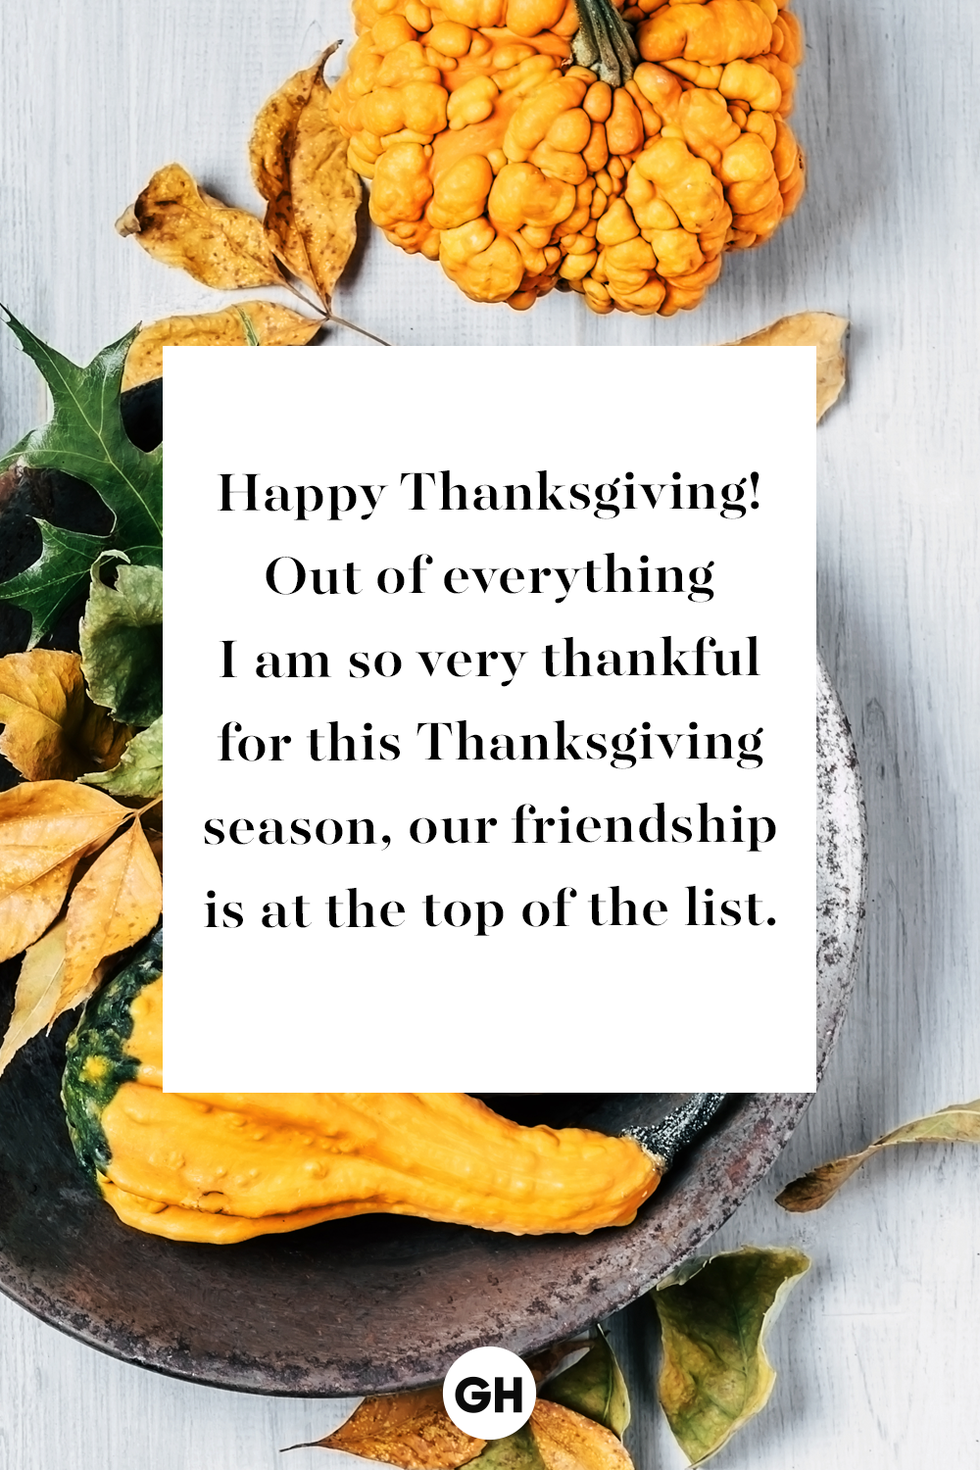 Happy Thanksgiving and the Many Things for Which We Are Thankful